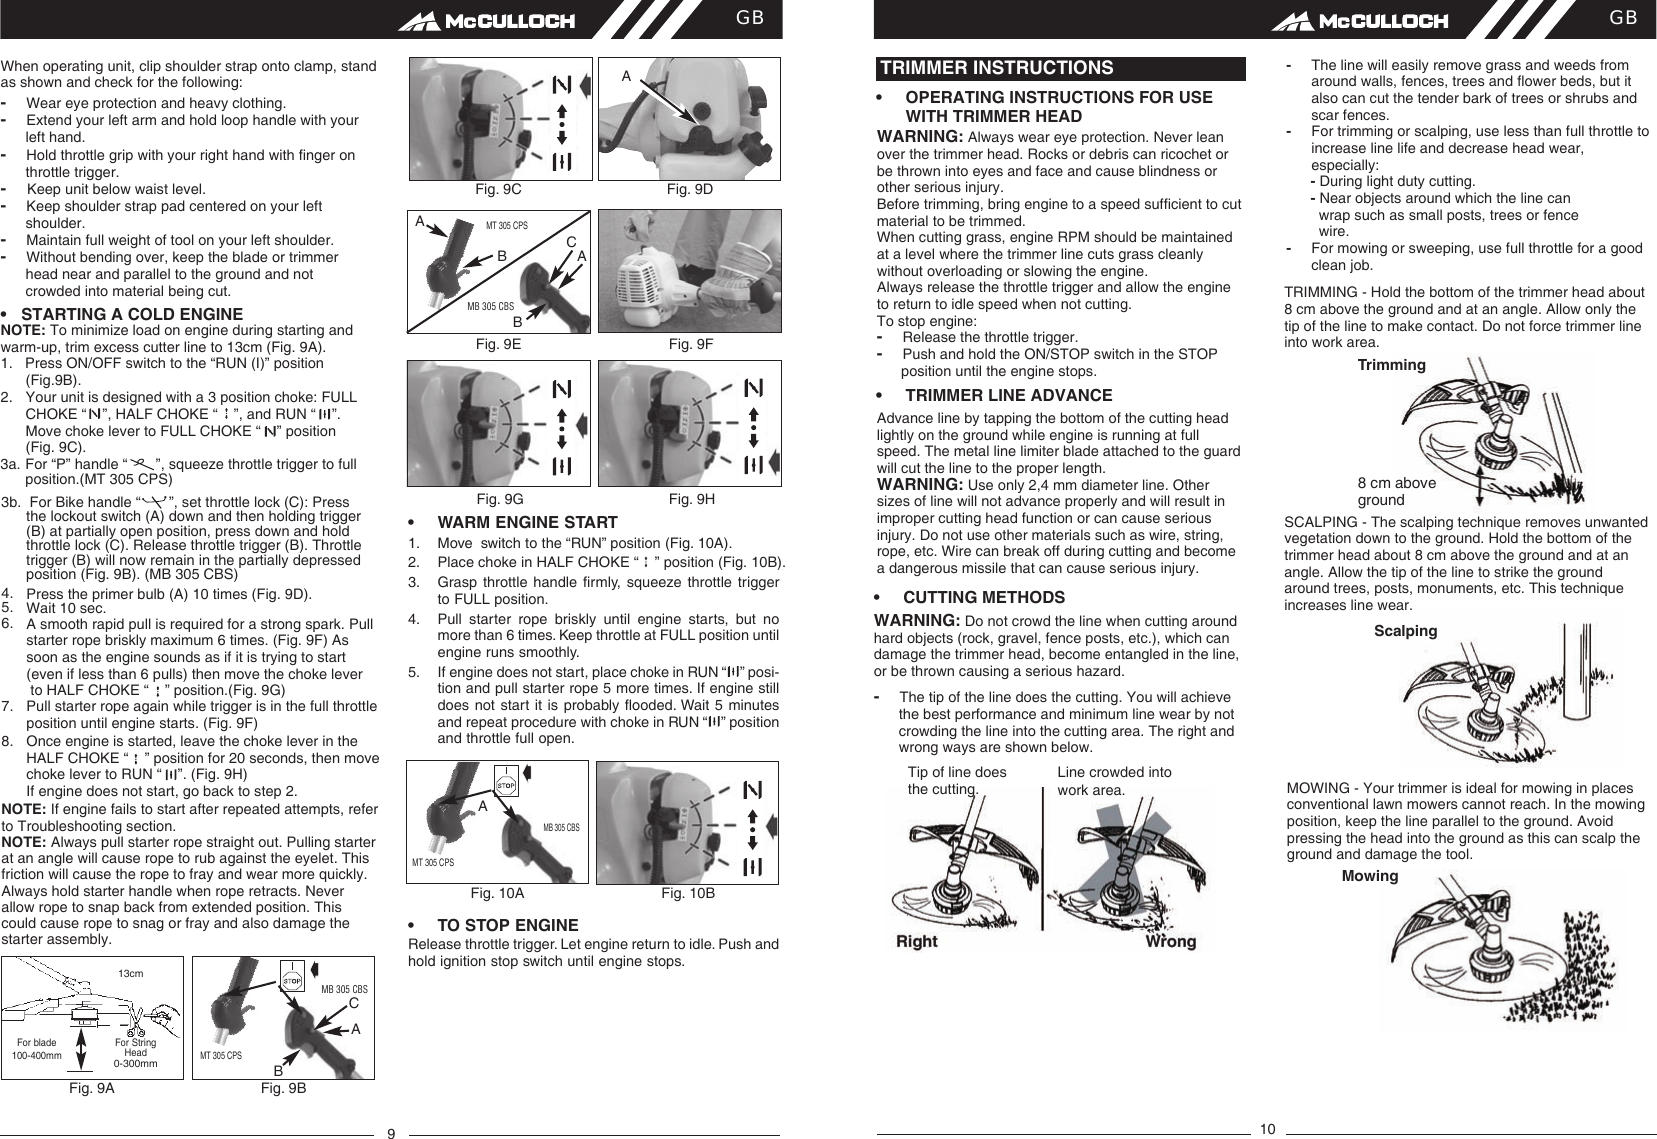 Page 6 of 9 - McCulloch MT 305 OM, McCulloch, CPS, MB CBS, 967153501, 967153502, 967153101, 966601201, 2012-12, Brushcutter User Manual  To The 1d81ec93-58ad-41d6-9294-243098001fde